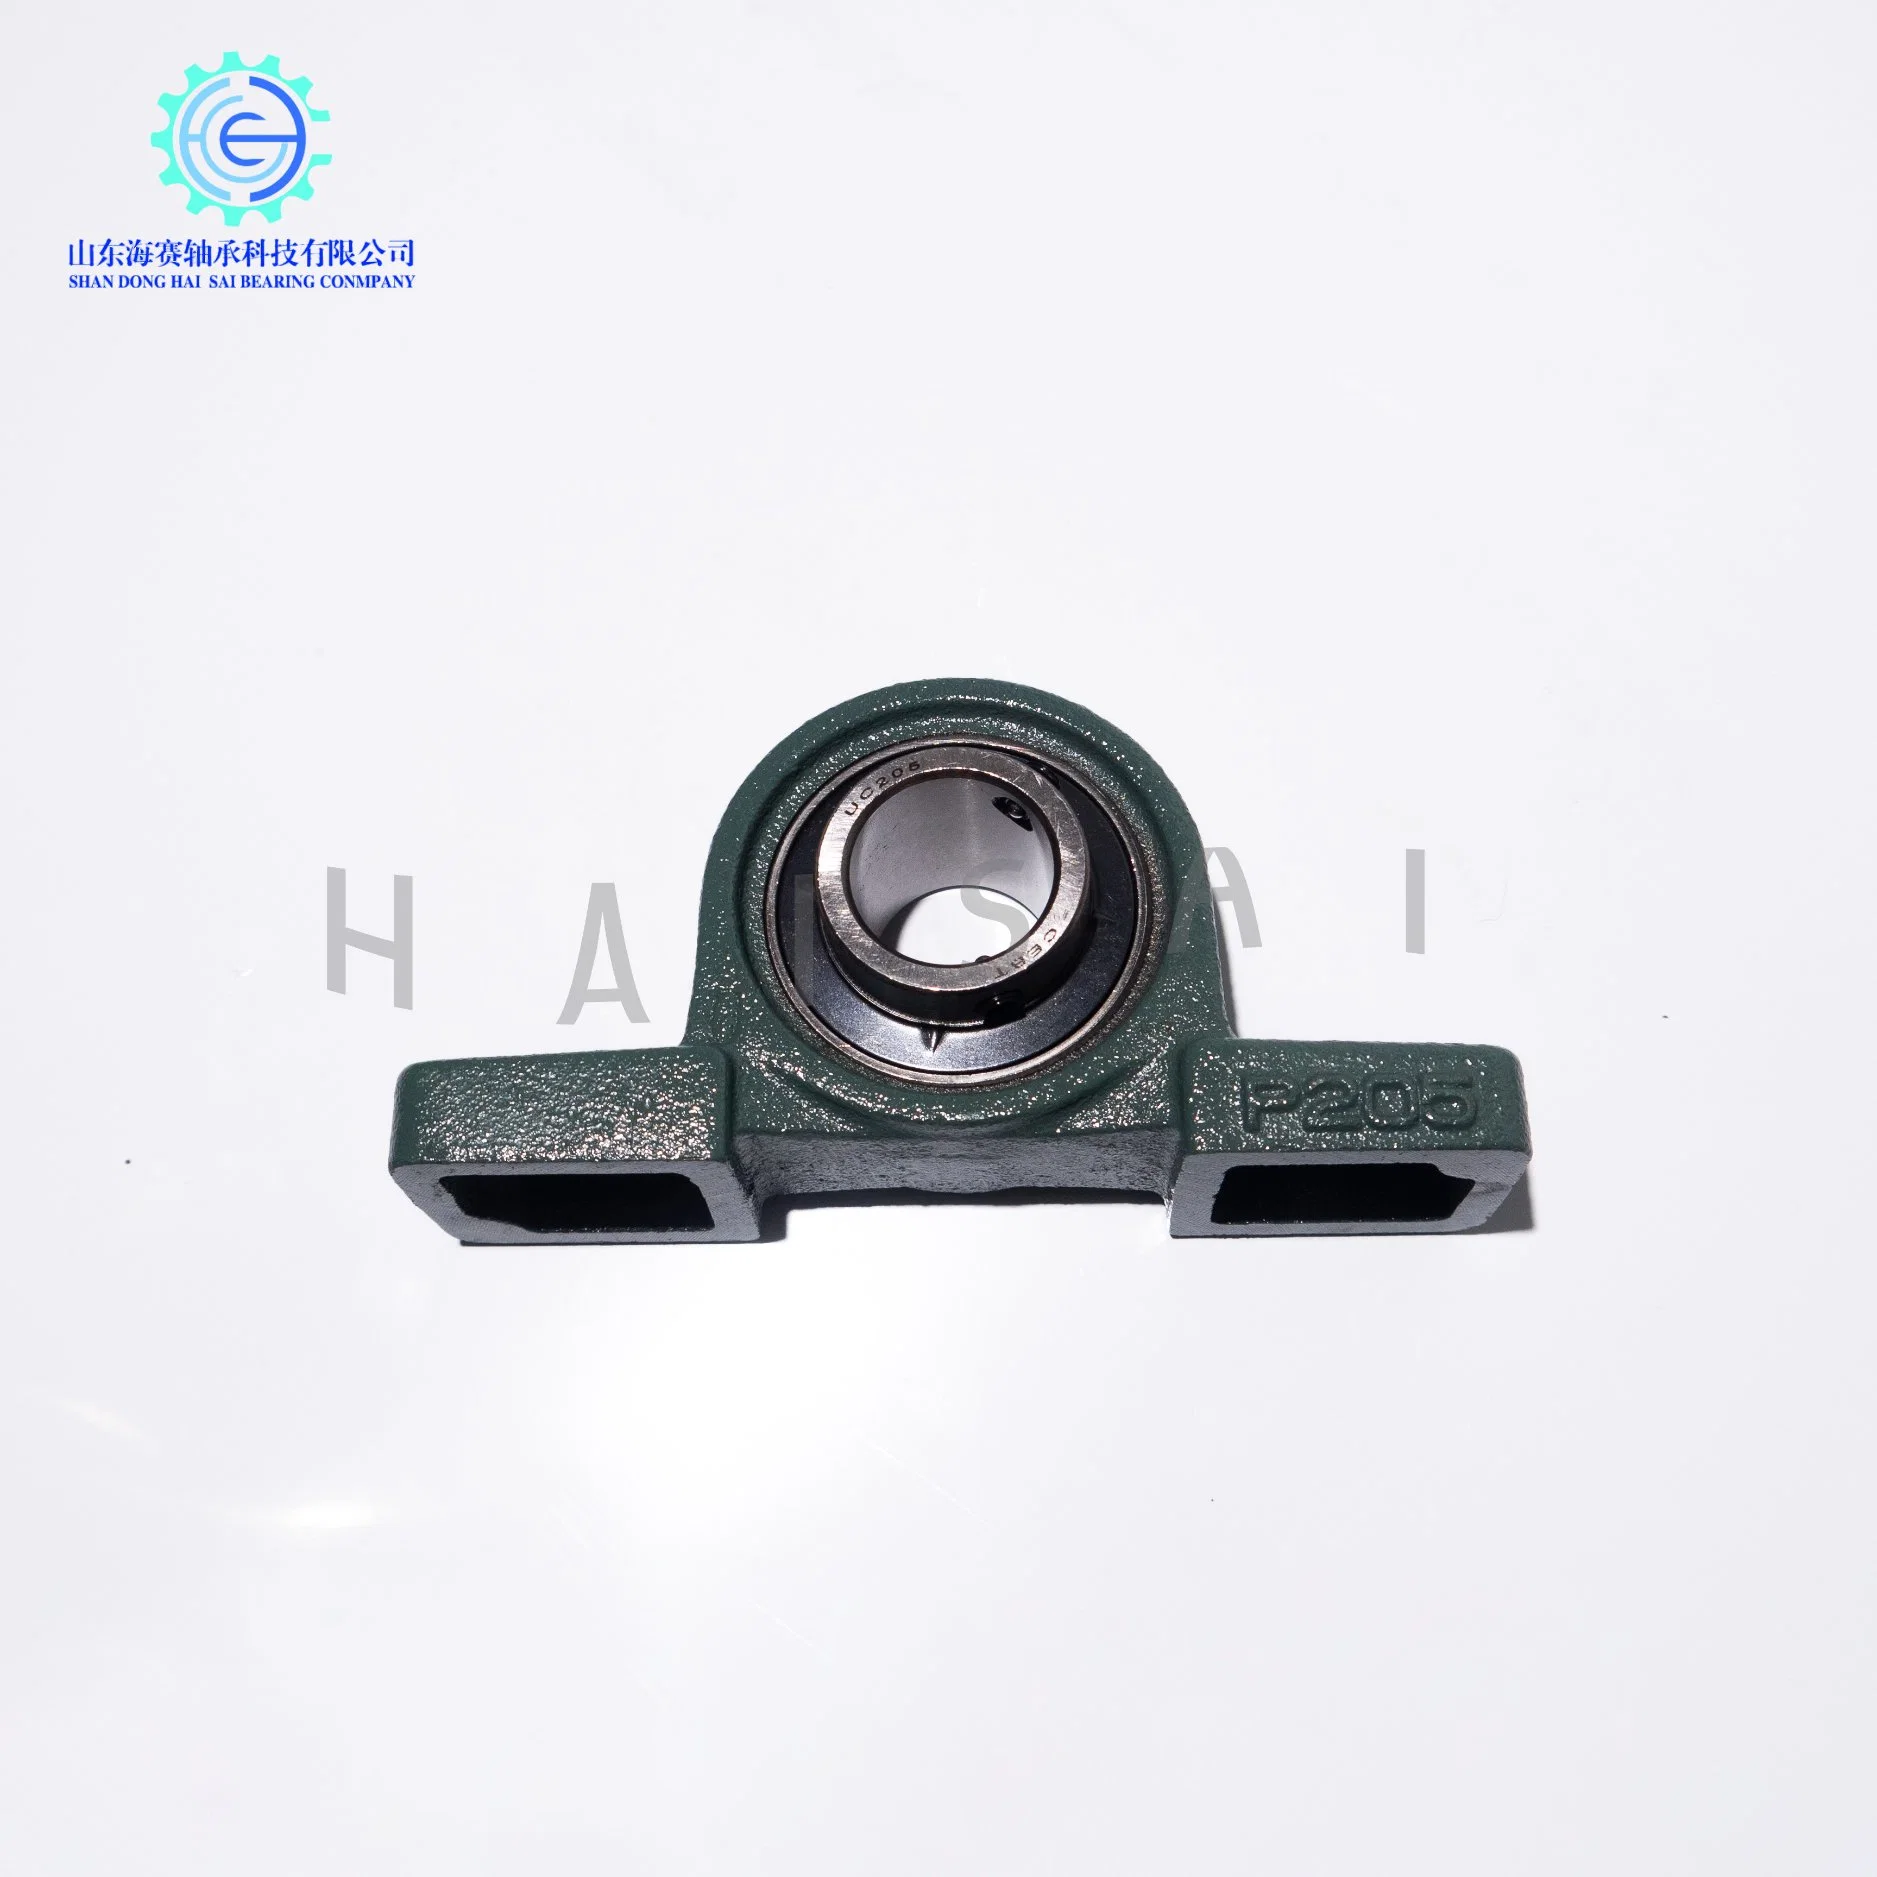 1688 China Real Manufacturer Plastic Machinery Insert Spherical Bearing UC205 UC204 UC207 UC208 UC210 Self-Aligning Ball/Tapered Roller/Cylindrical Roller Beari